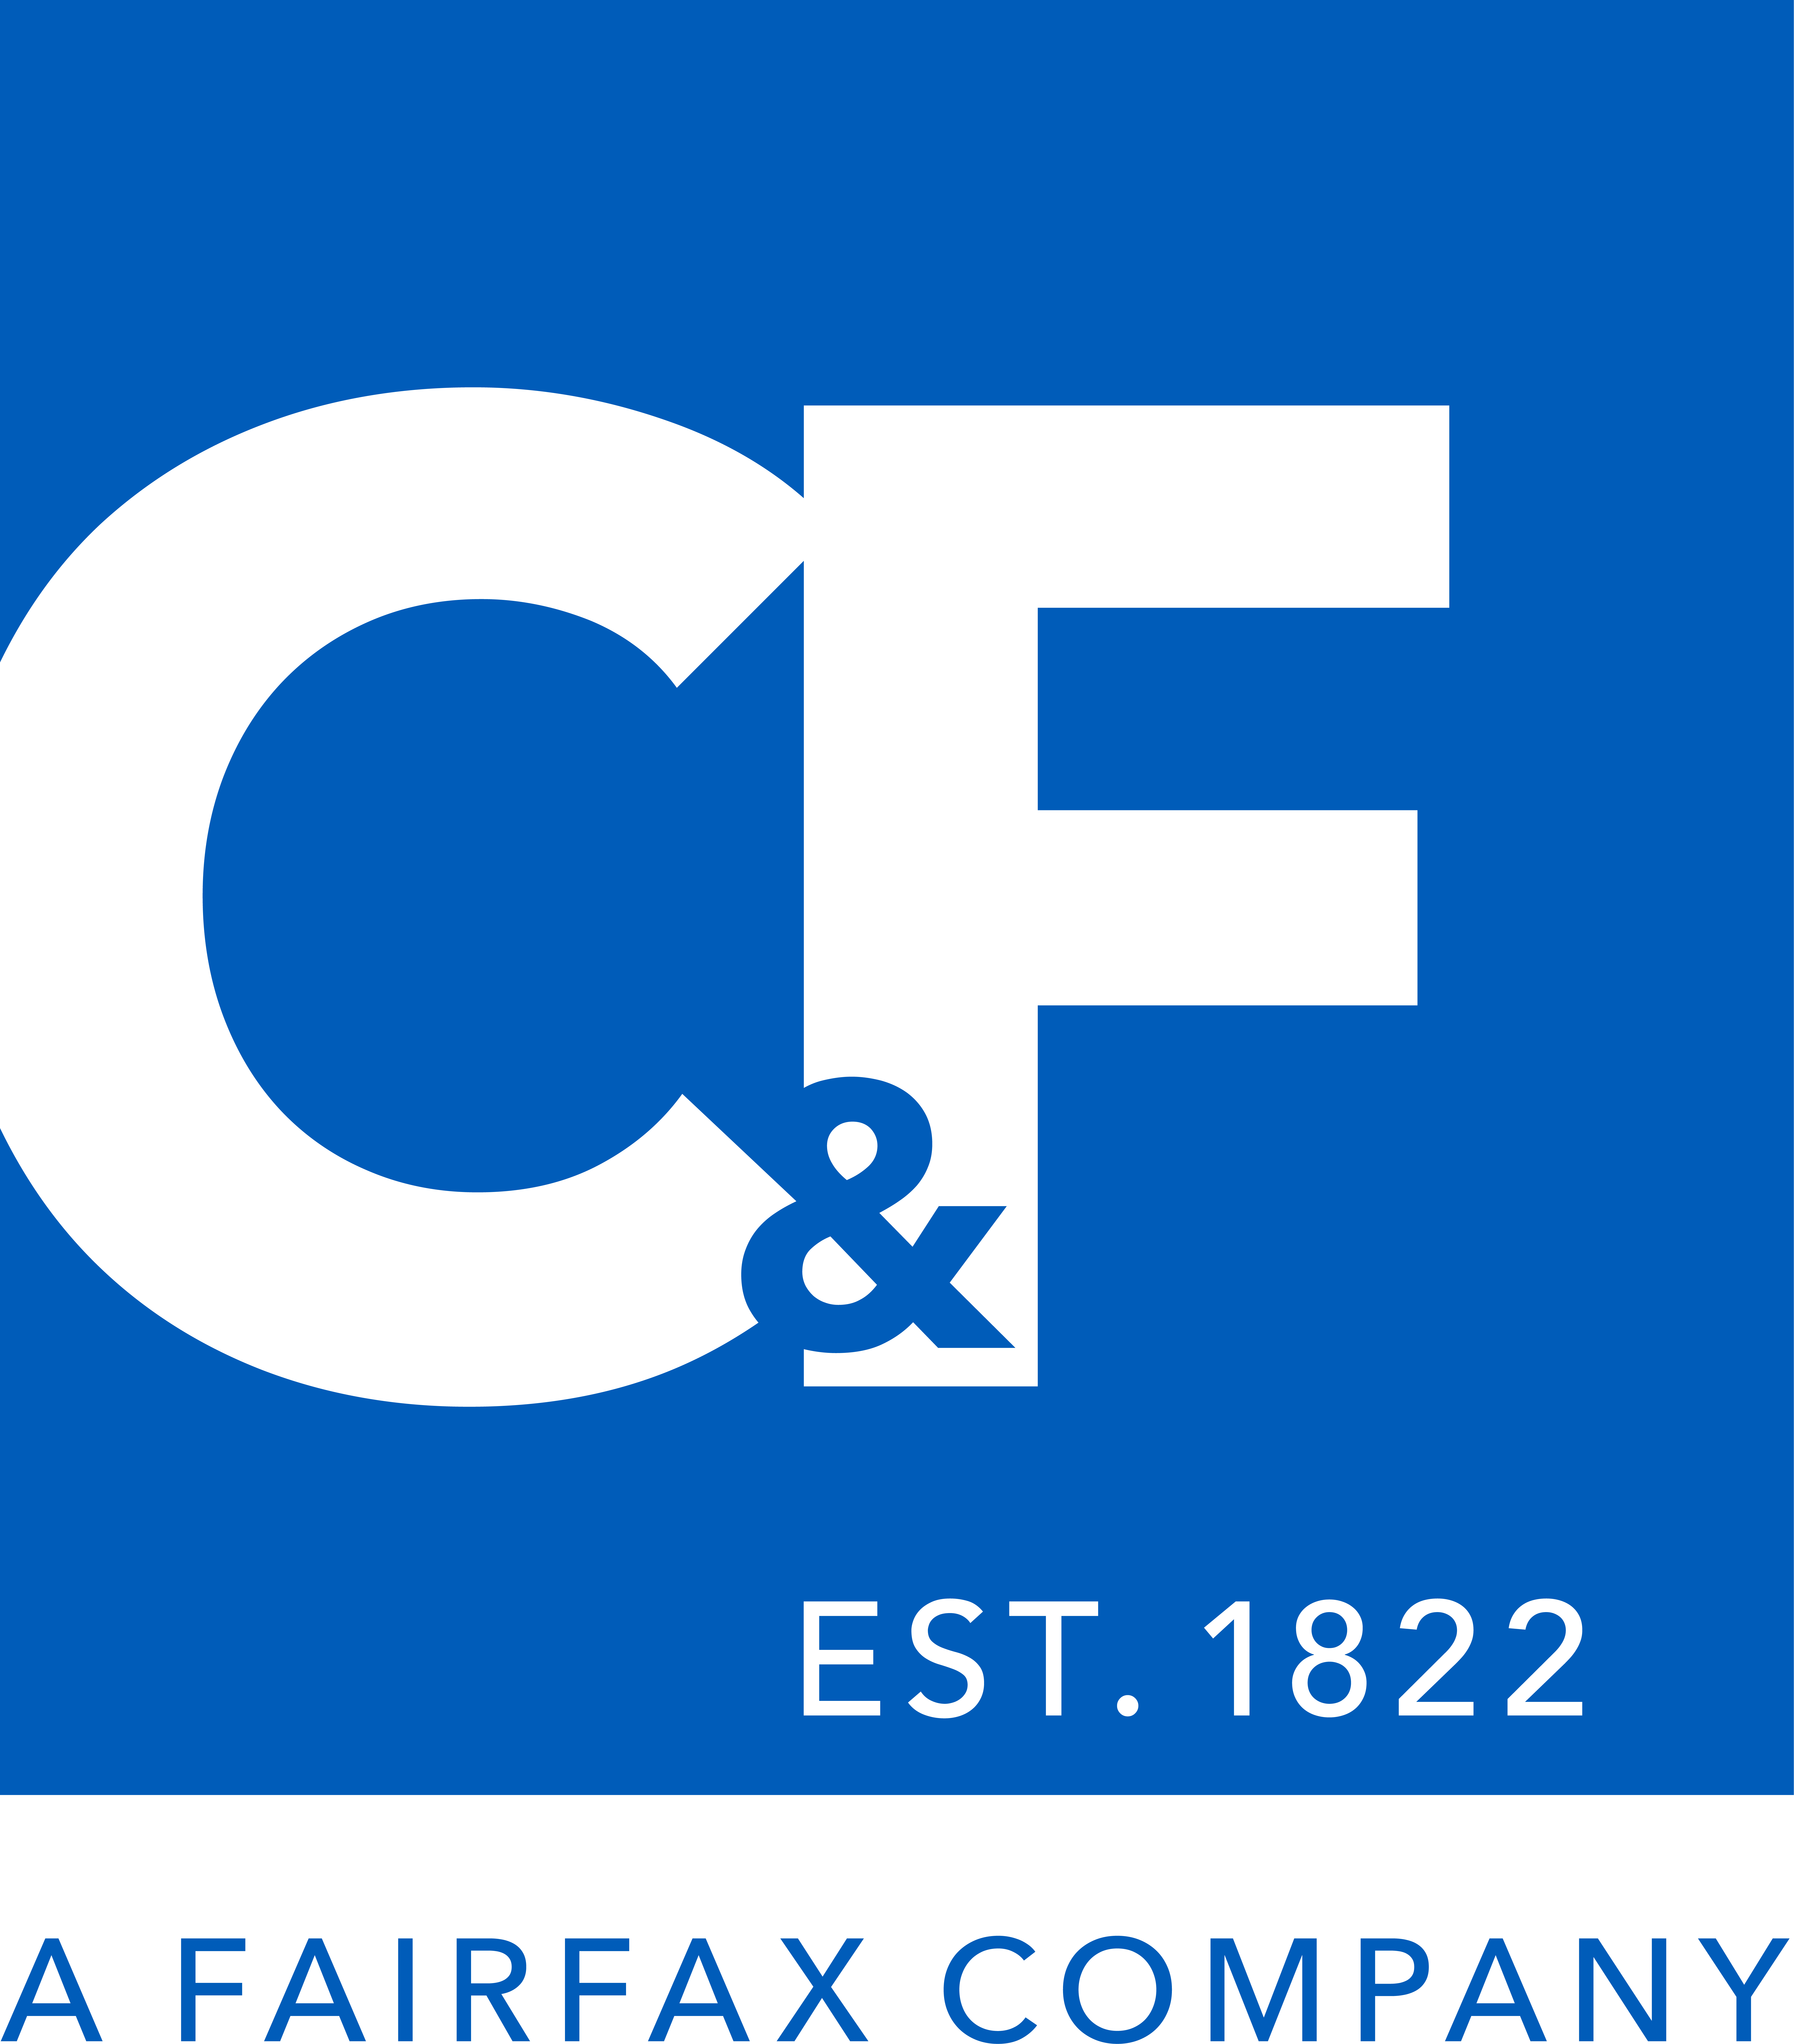 Crum & Forster logo blue square with C&F in white lettering and tagline says, "EST. 1822" in white lettering.